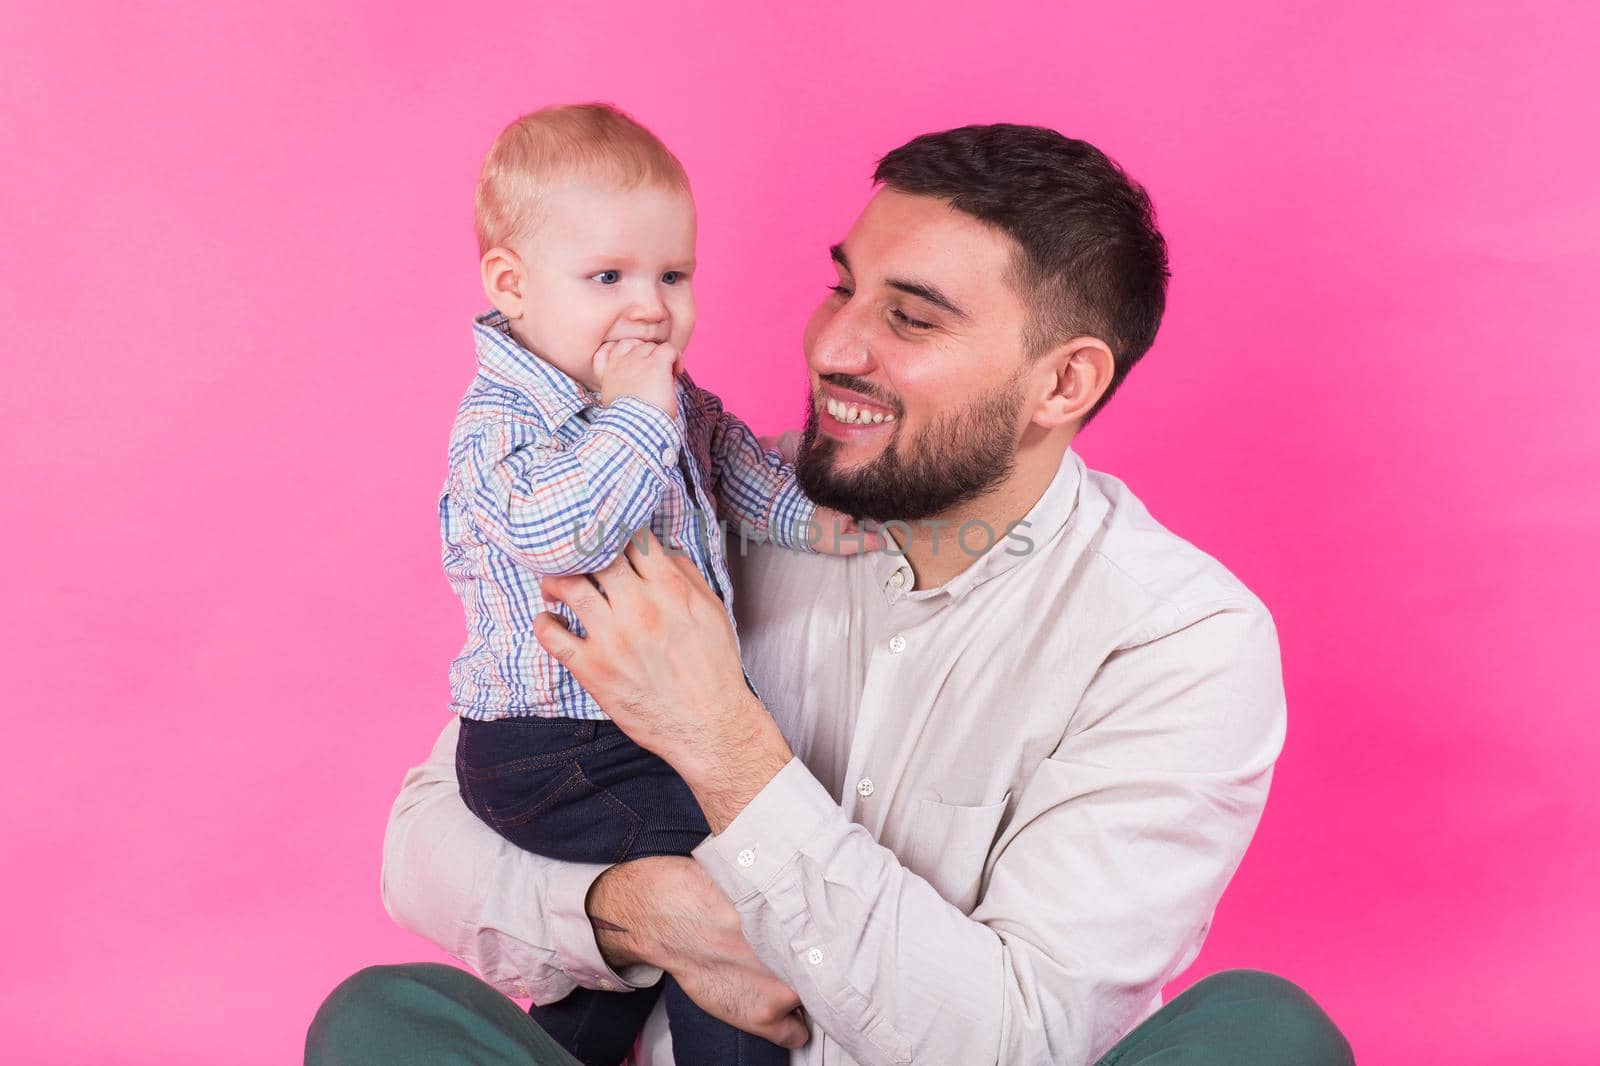 Happy portrait of the father and son on pink background. In studio.